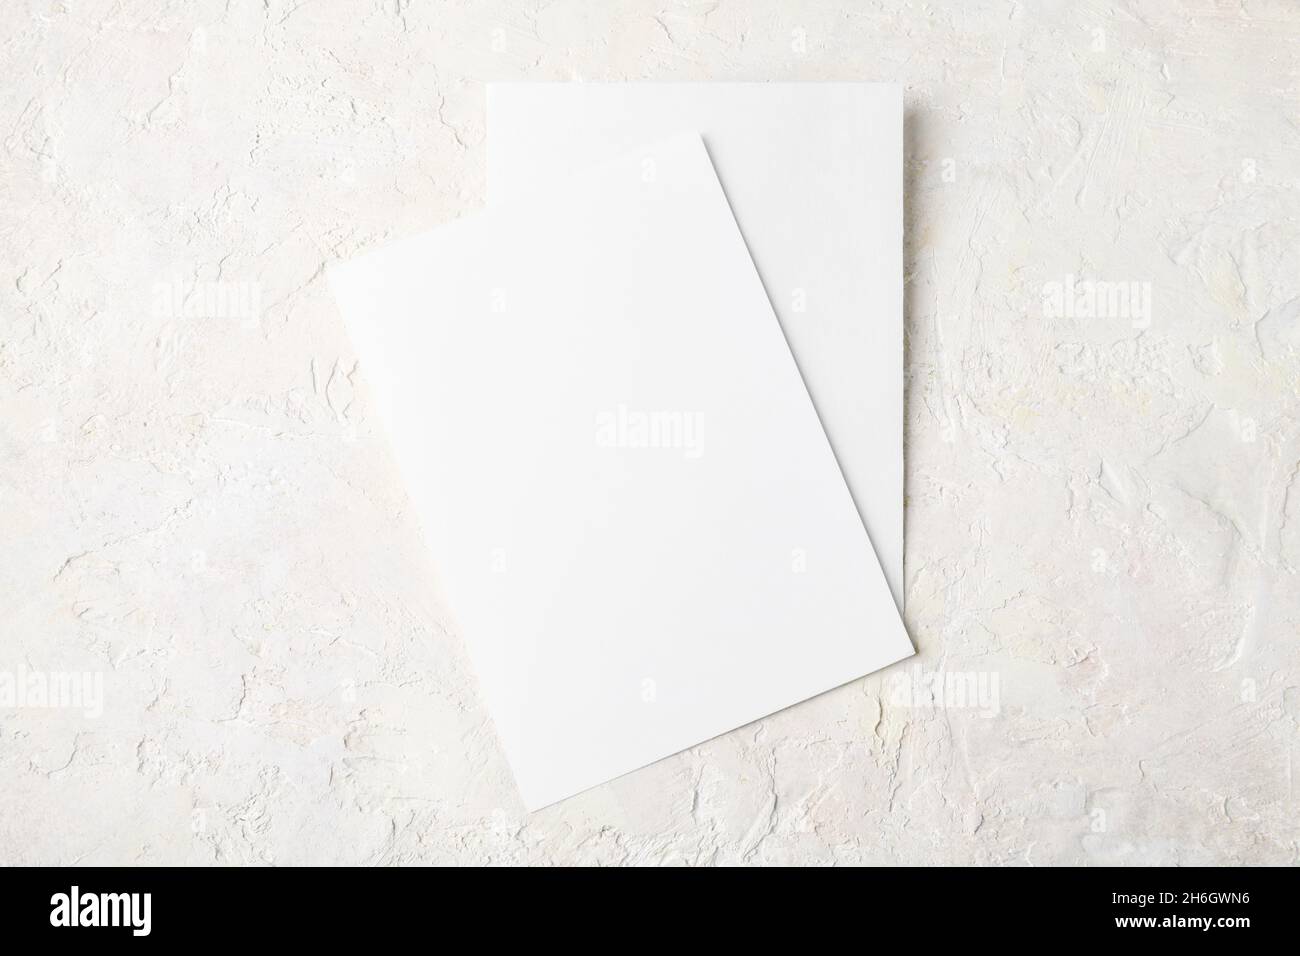 200-Pack Blank Greeting Cards - Plain Cardstock Postcard Style Notecards - Rounded Corners with Smooth Surface, for DIY Business, Invitation, Birthday